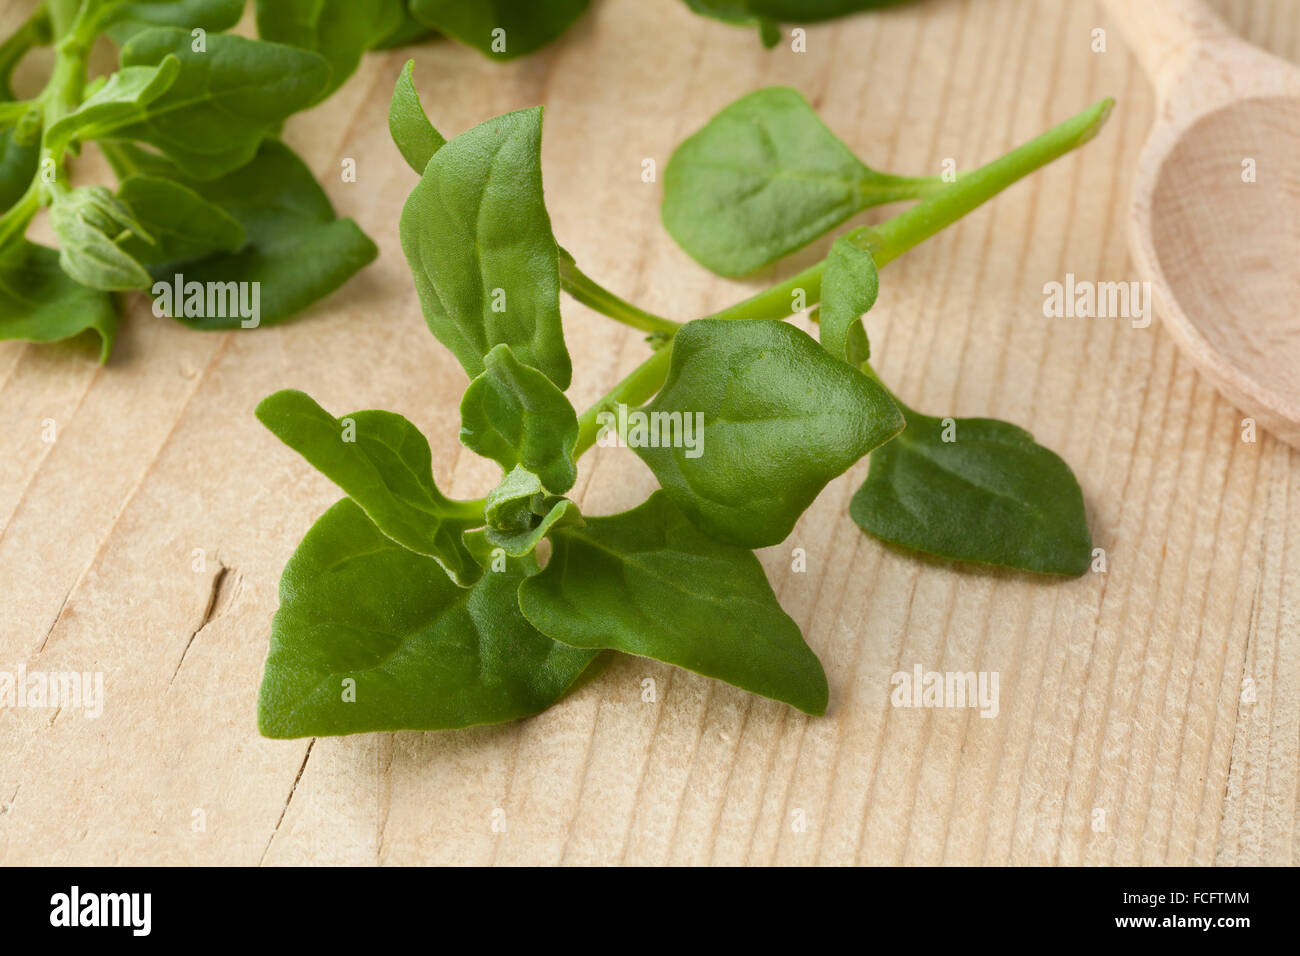 Fresh raw New Zealand spinach leaves close up Stock Photo